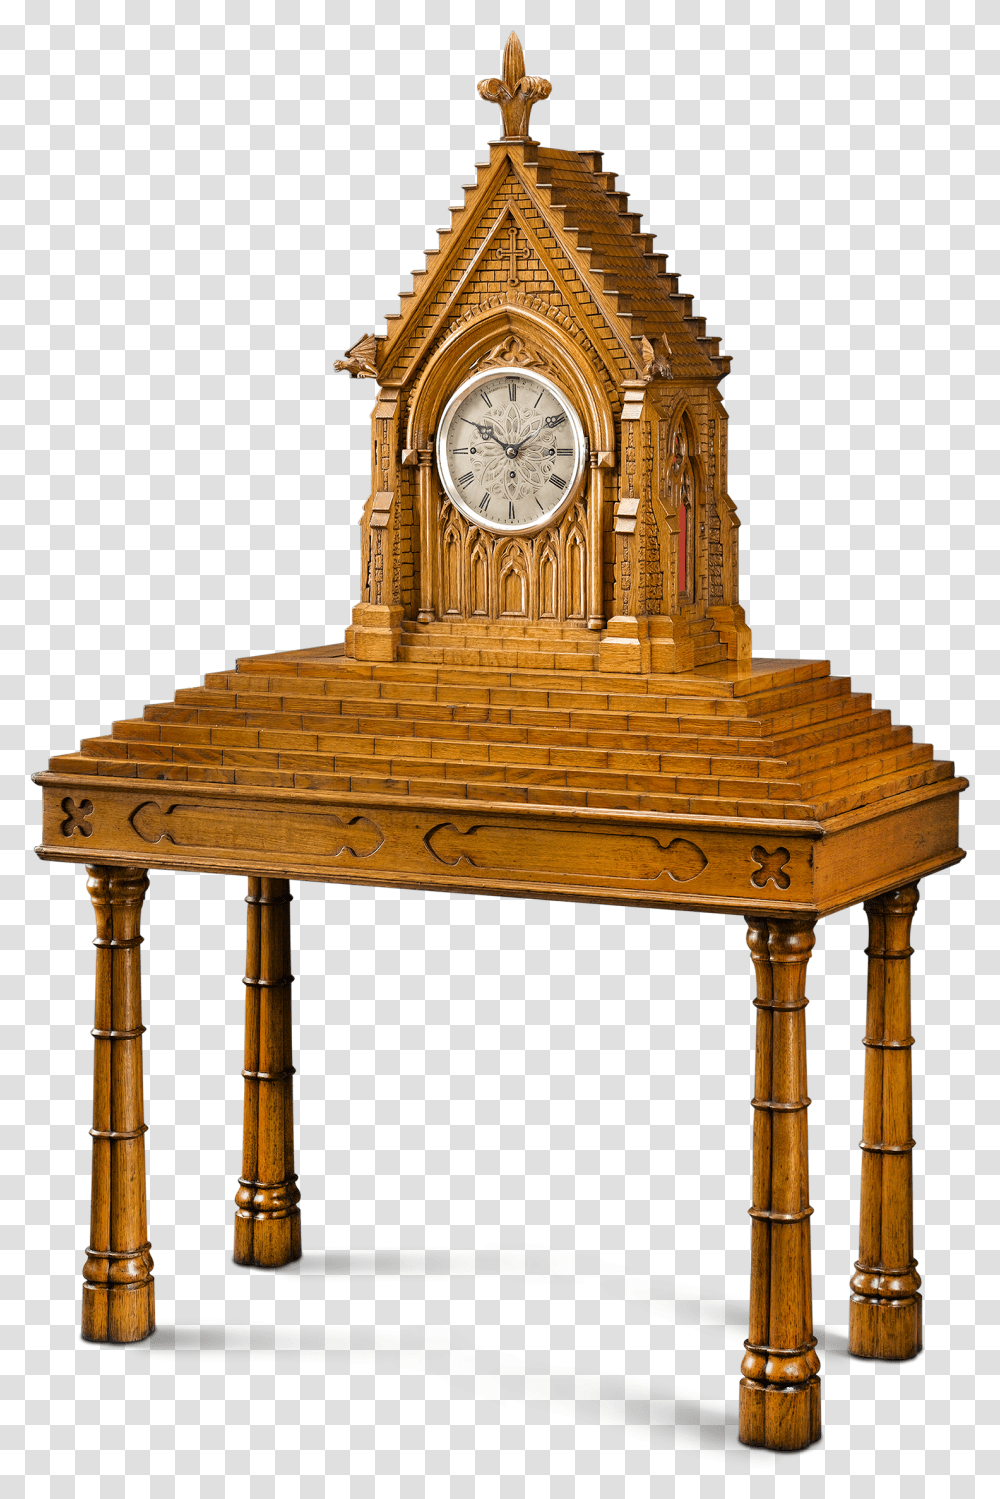 Gothic Musical Clock By Nicole Frres Antique, Furniture, Tabletop, Architecture, Building Transparent Png